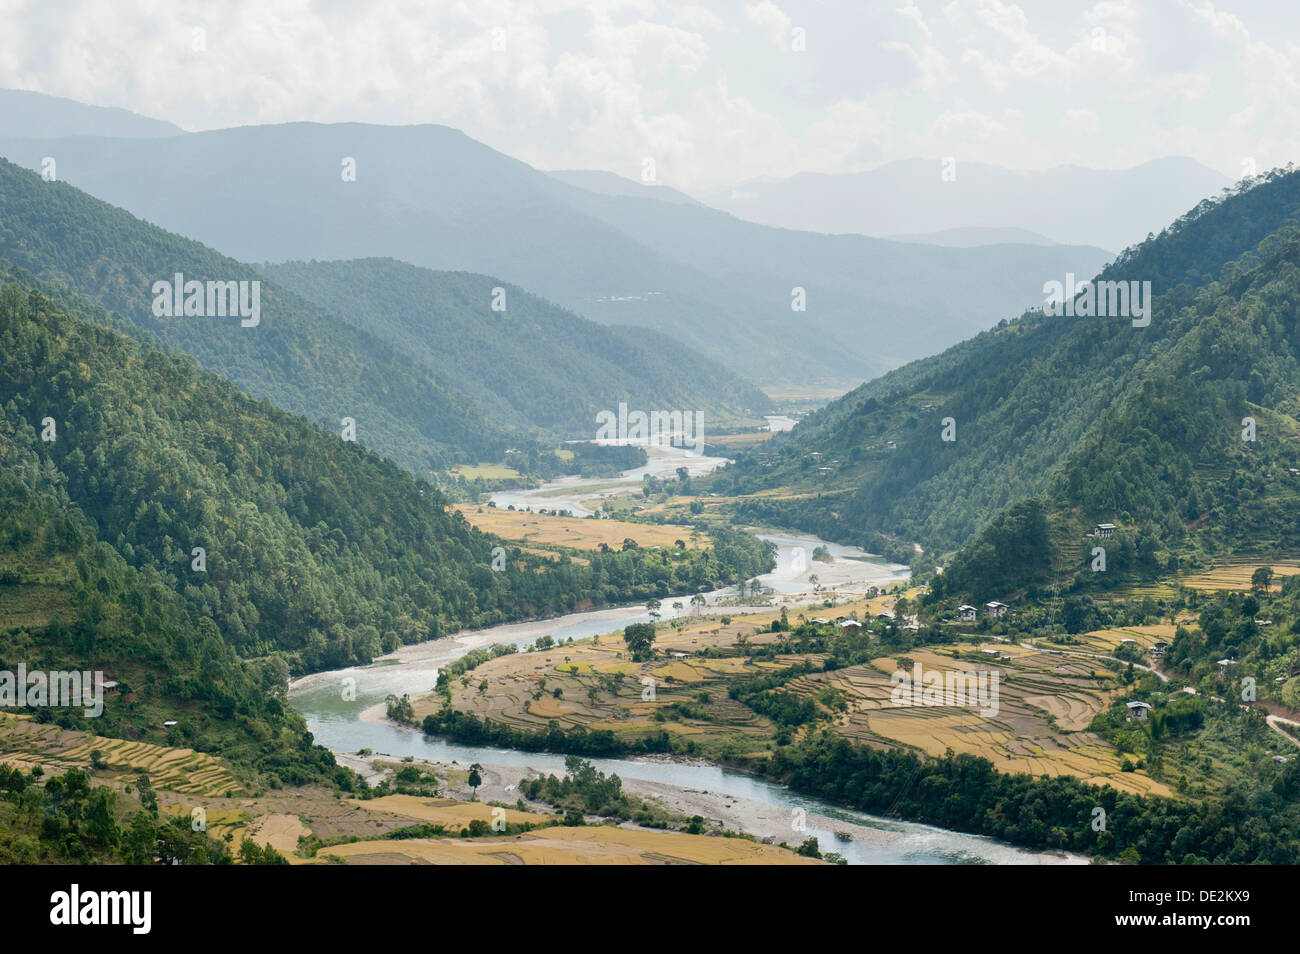 River landscape, river meandering through a valley near Punakha, the Himalayas, Kingdom of Bhutan, South Asia, Asia Stock Photo